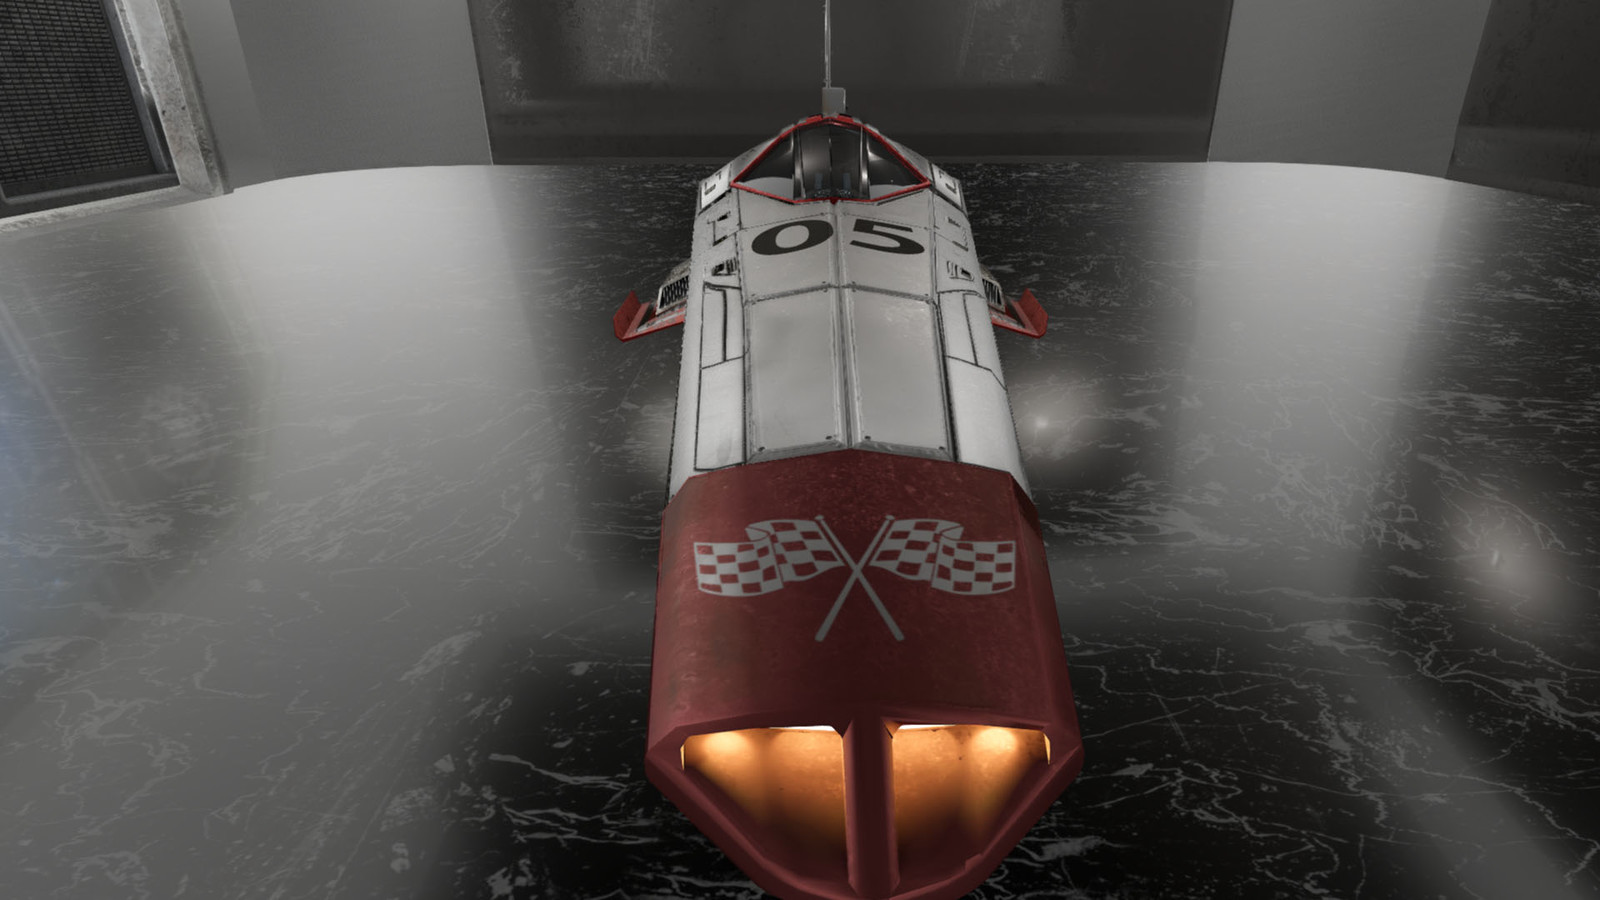 Small spaceship, front view